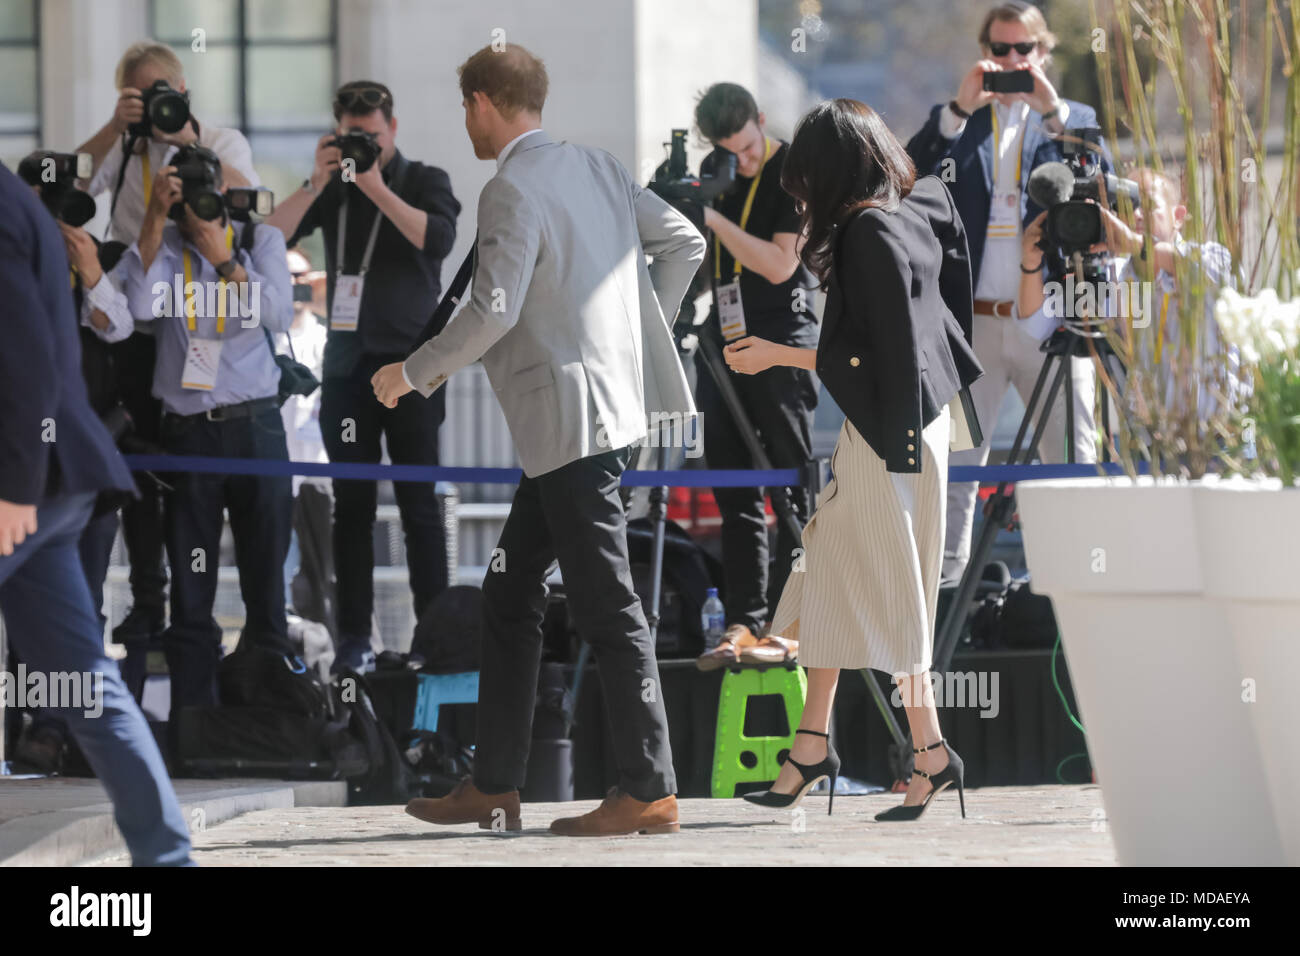 London, UK . 18th April 2018. HRH Prince Harry and Ms. Meghan Markle mirror each others steps perfectly as they walk in unison to a reception with delegates from the Commonwealth Youth Forum at Queen Elizabeth II Conference Centre, London, UK. Credit: Chris Aubrey/Alamy Live News Stock Photo